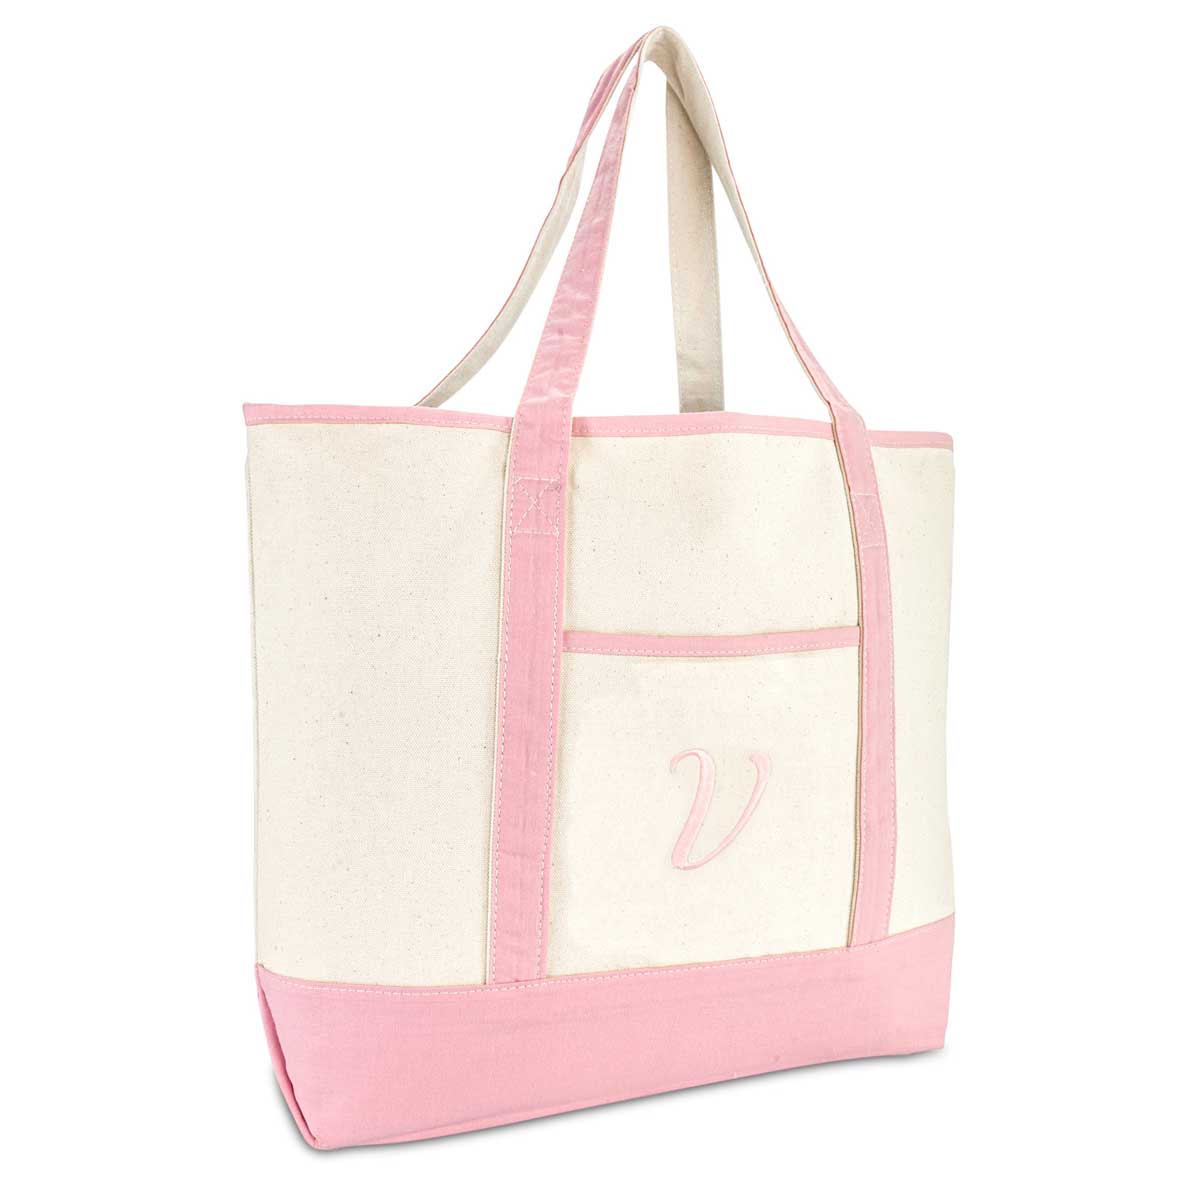 Personalized Large Beach Bags - Cotton Canvas